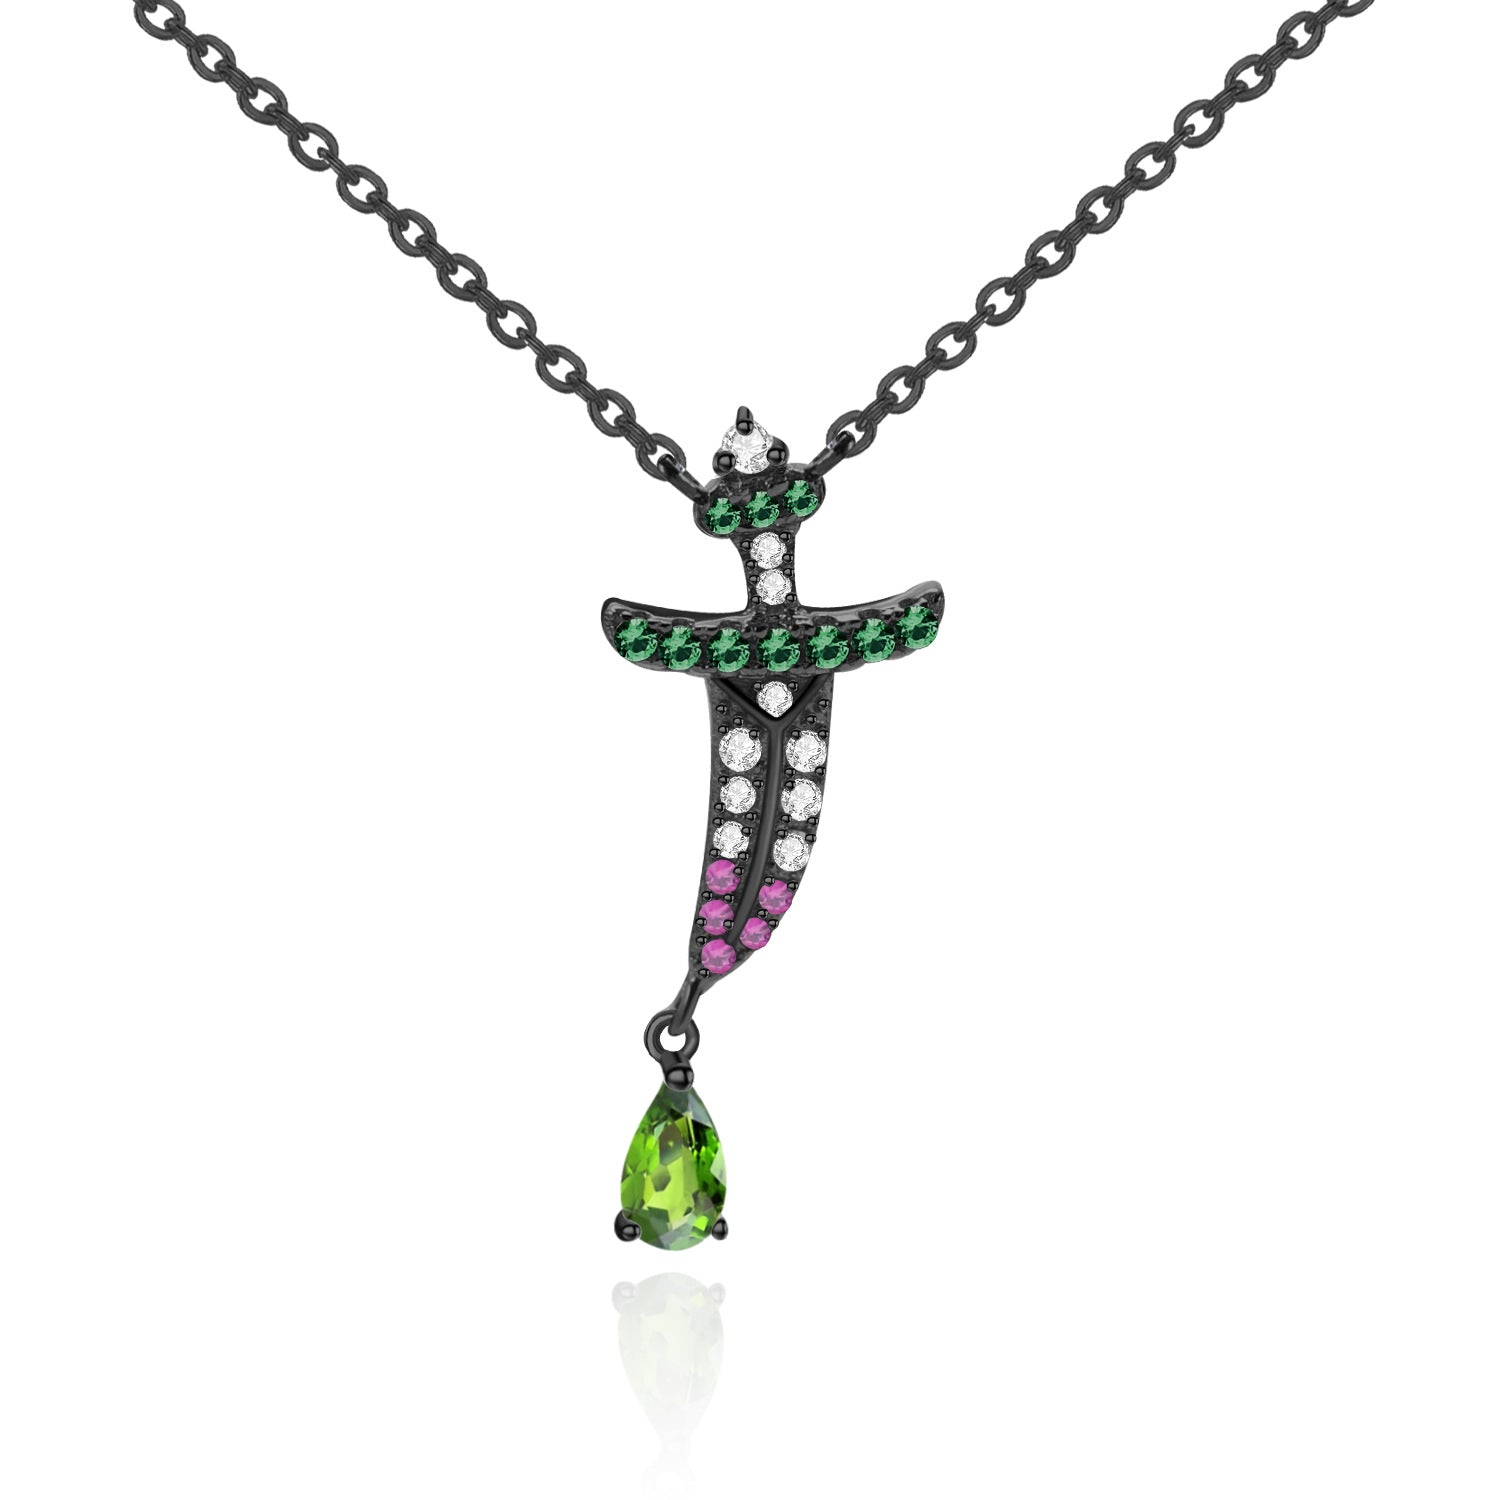 Dark Retro Element Style Inlaid Natural Colourful Gemstone Personality Pocket Knife Pendant Silver Necklace for Women